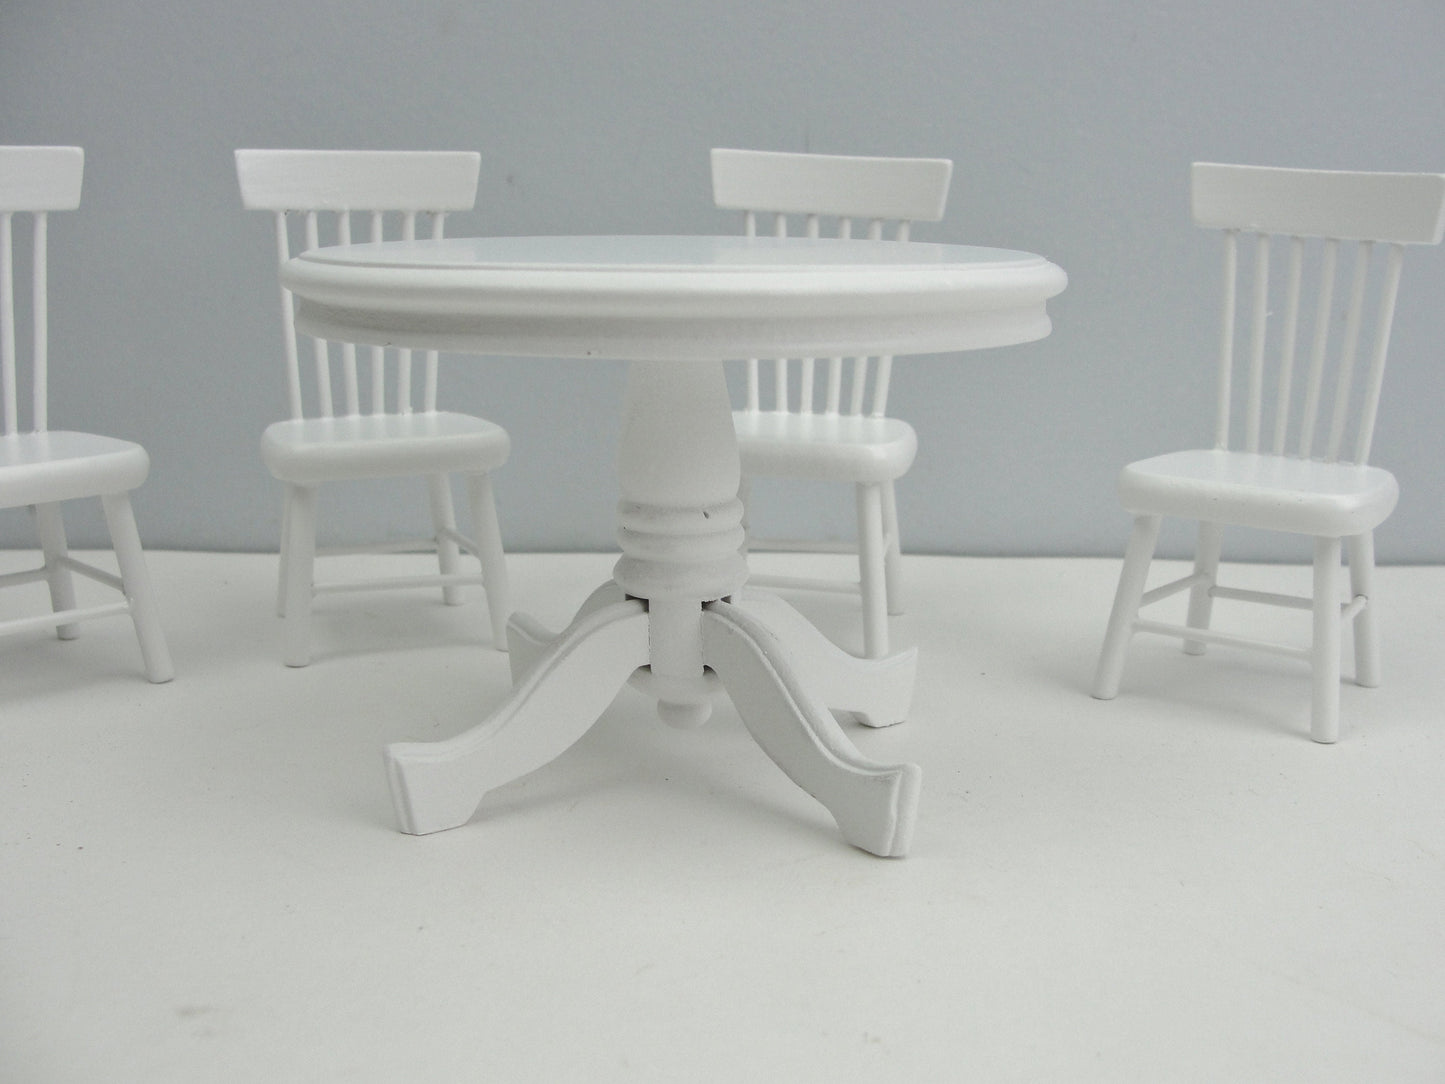 Dollhouse miniature furniture table and 4 chairs white